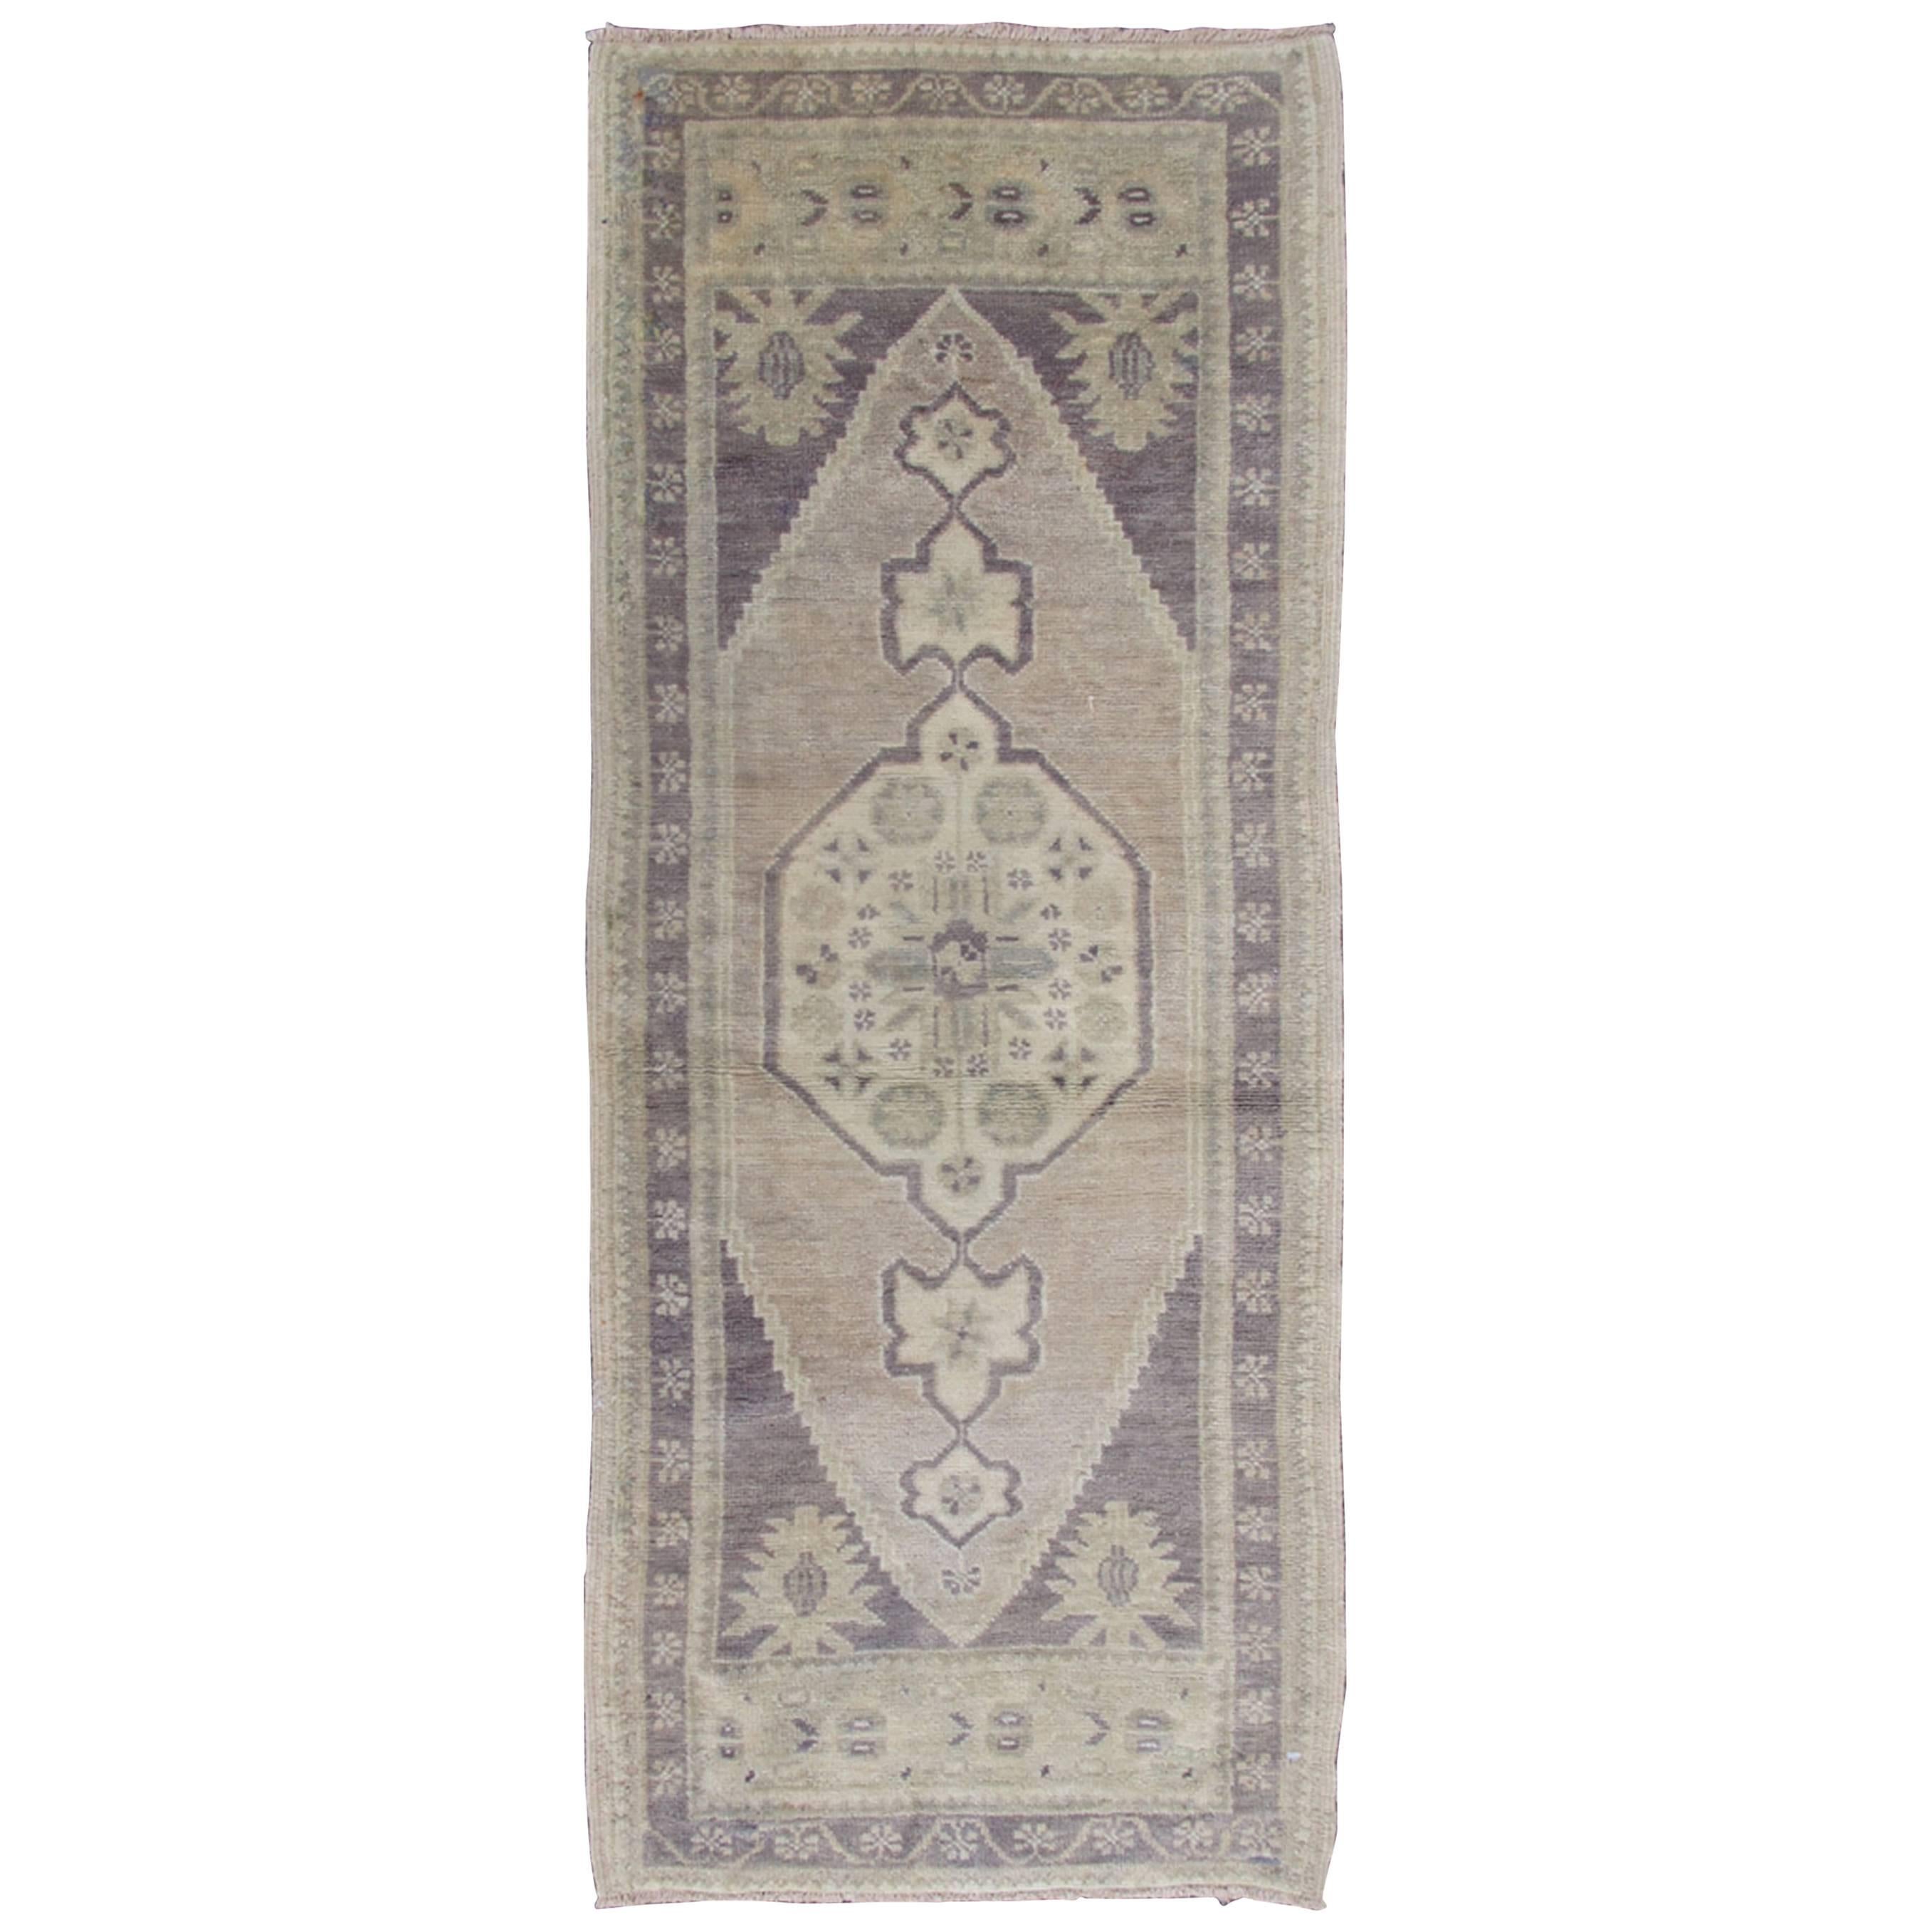 Vintage Turkish Oushak Carpet with Medallion in Dark Gray/Purple and Ivory